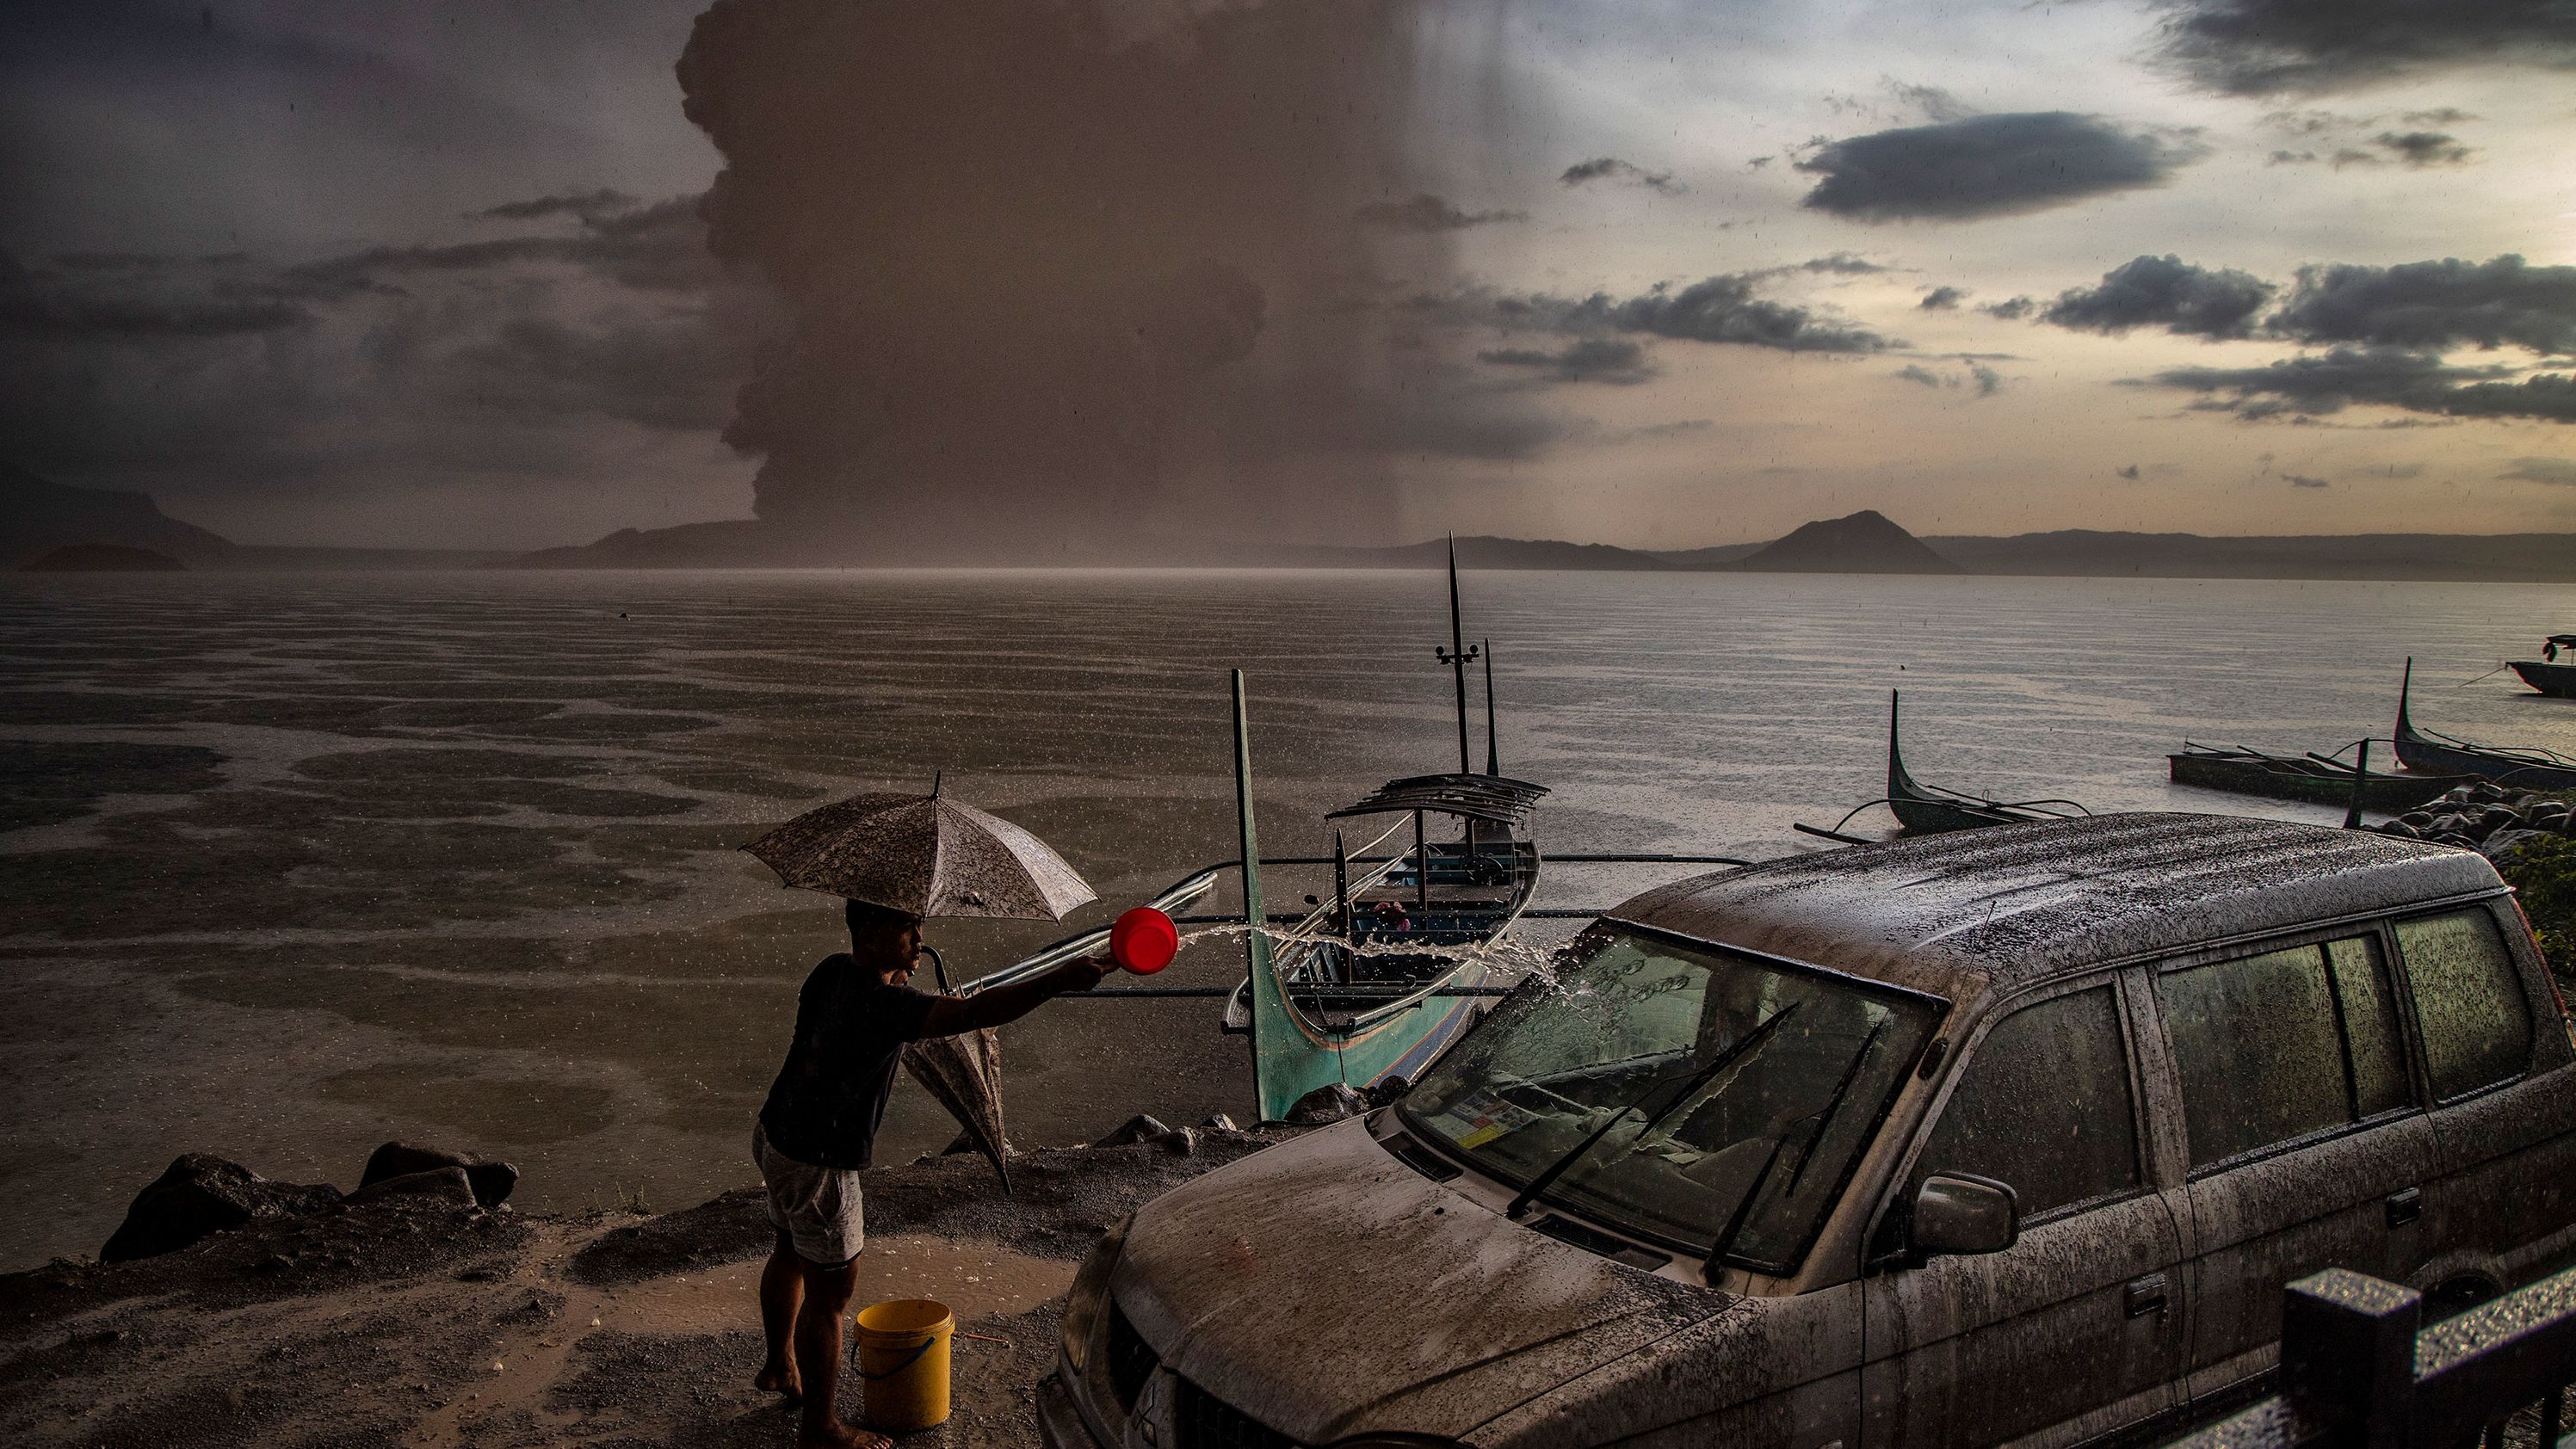 A Talisay resident splashes water on a vehicle covered in ash.